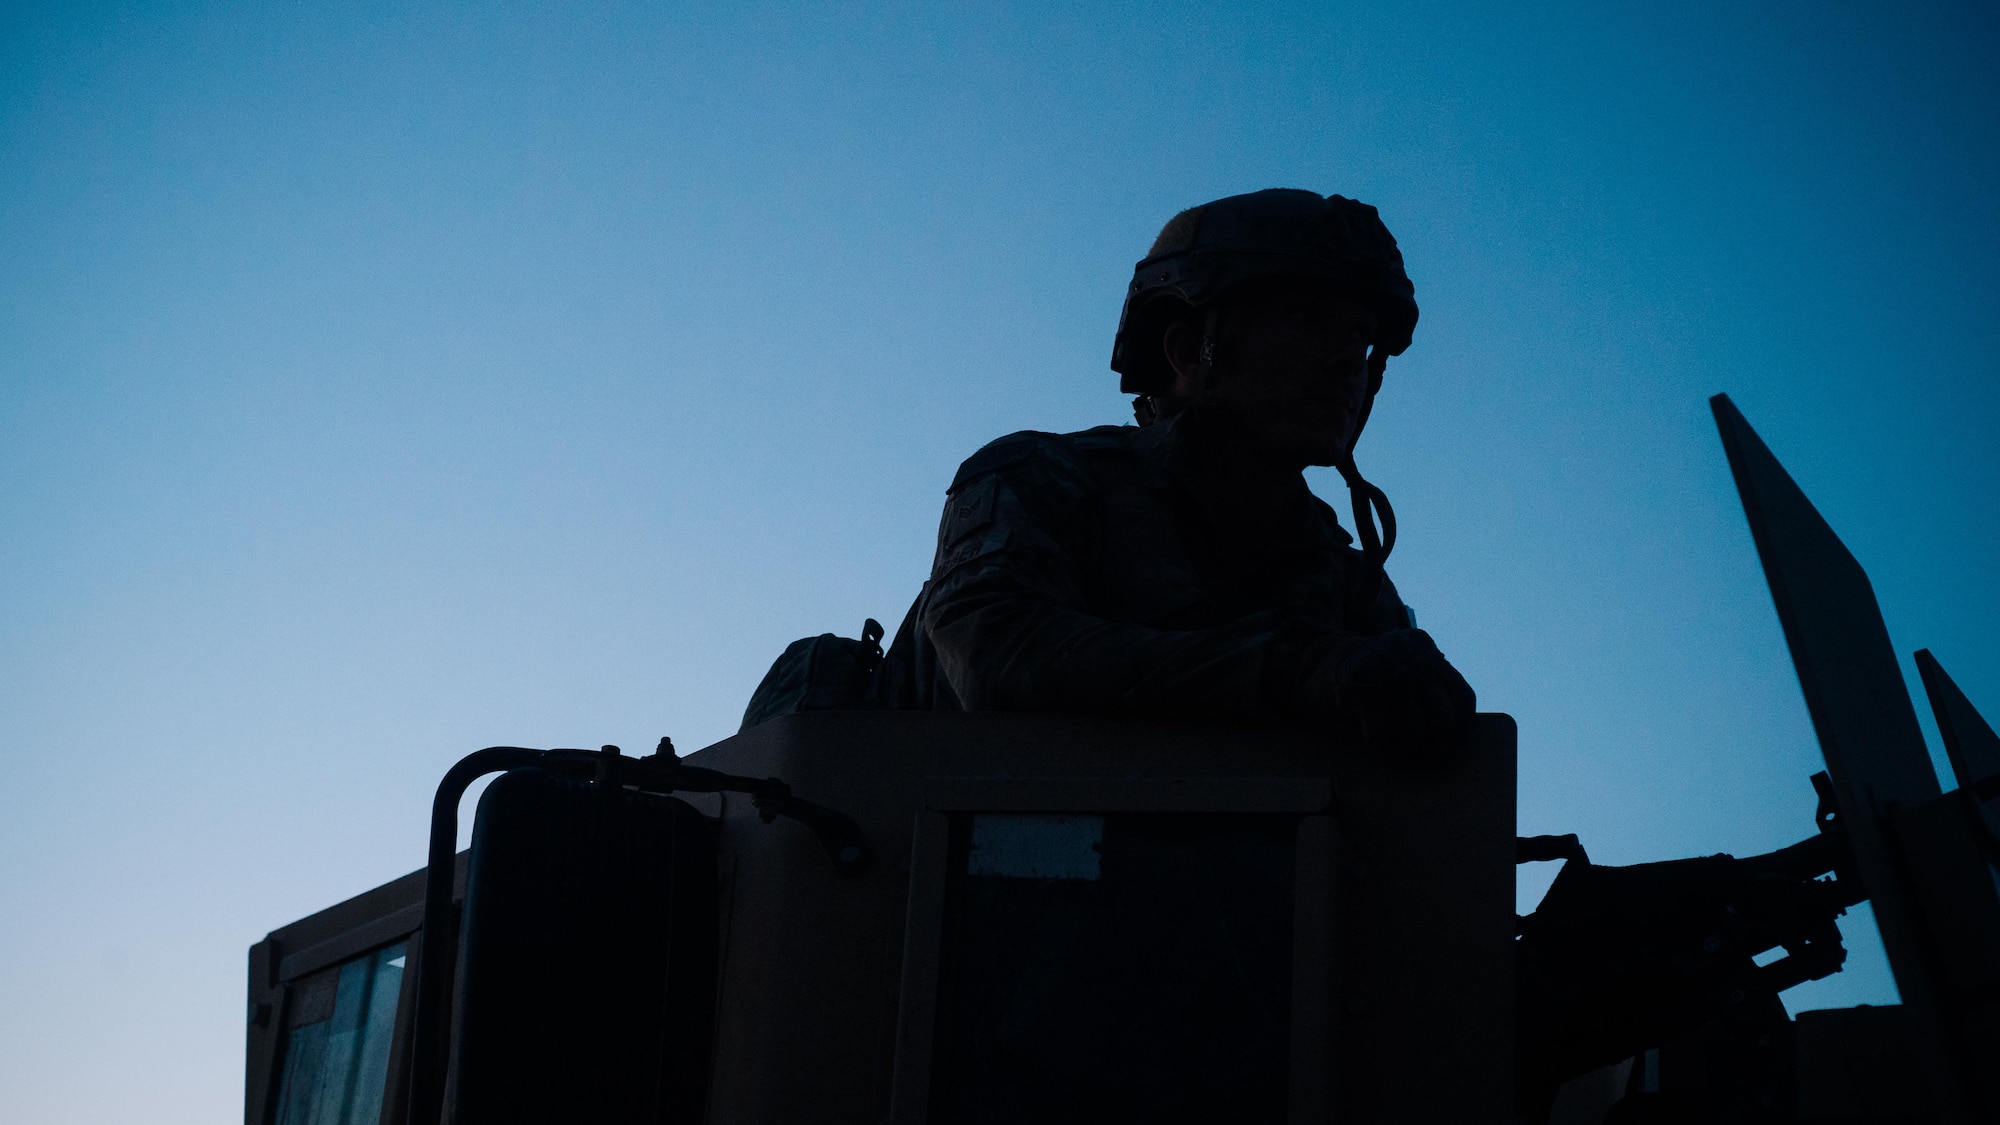 Senior Airman Johnathan Sorber, 821st Contingency Response Group first in security team member, scans the horizon while traveling to a defensive fighting position while on perimeter watch at Qayyarah West Airfield, Iraq, Nov. 17, 2016. The 821st CRG is highly-specialized in training and rapidly deploying personnel to quickly open airfields and establish, expand, sustain and coordinate air mobility operations in austere, bare-base conditions. (U.S. Air Force photo by Senior Airman Jordan Castelan)